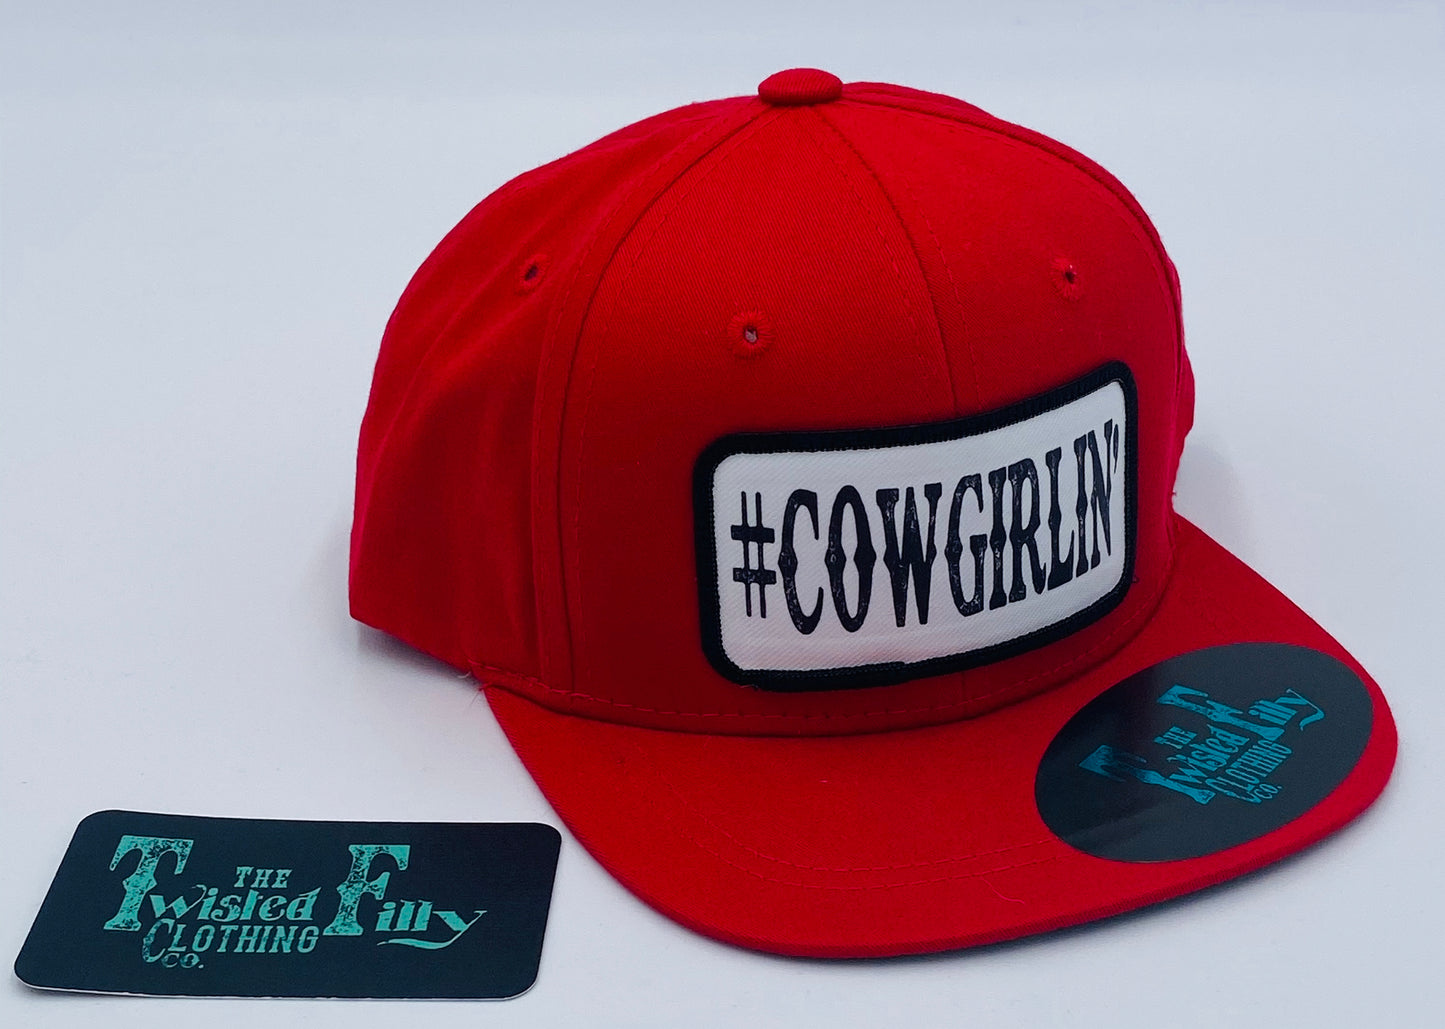 #Cowgirlin - Youth/Adult Snapback Hat - Red